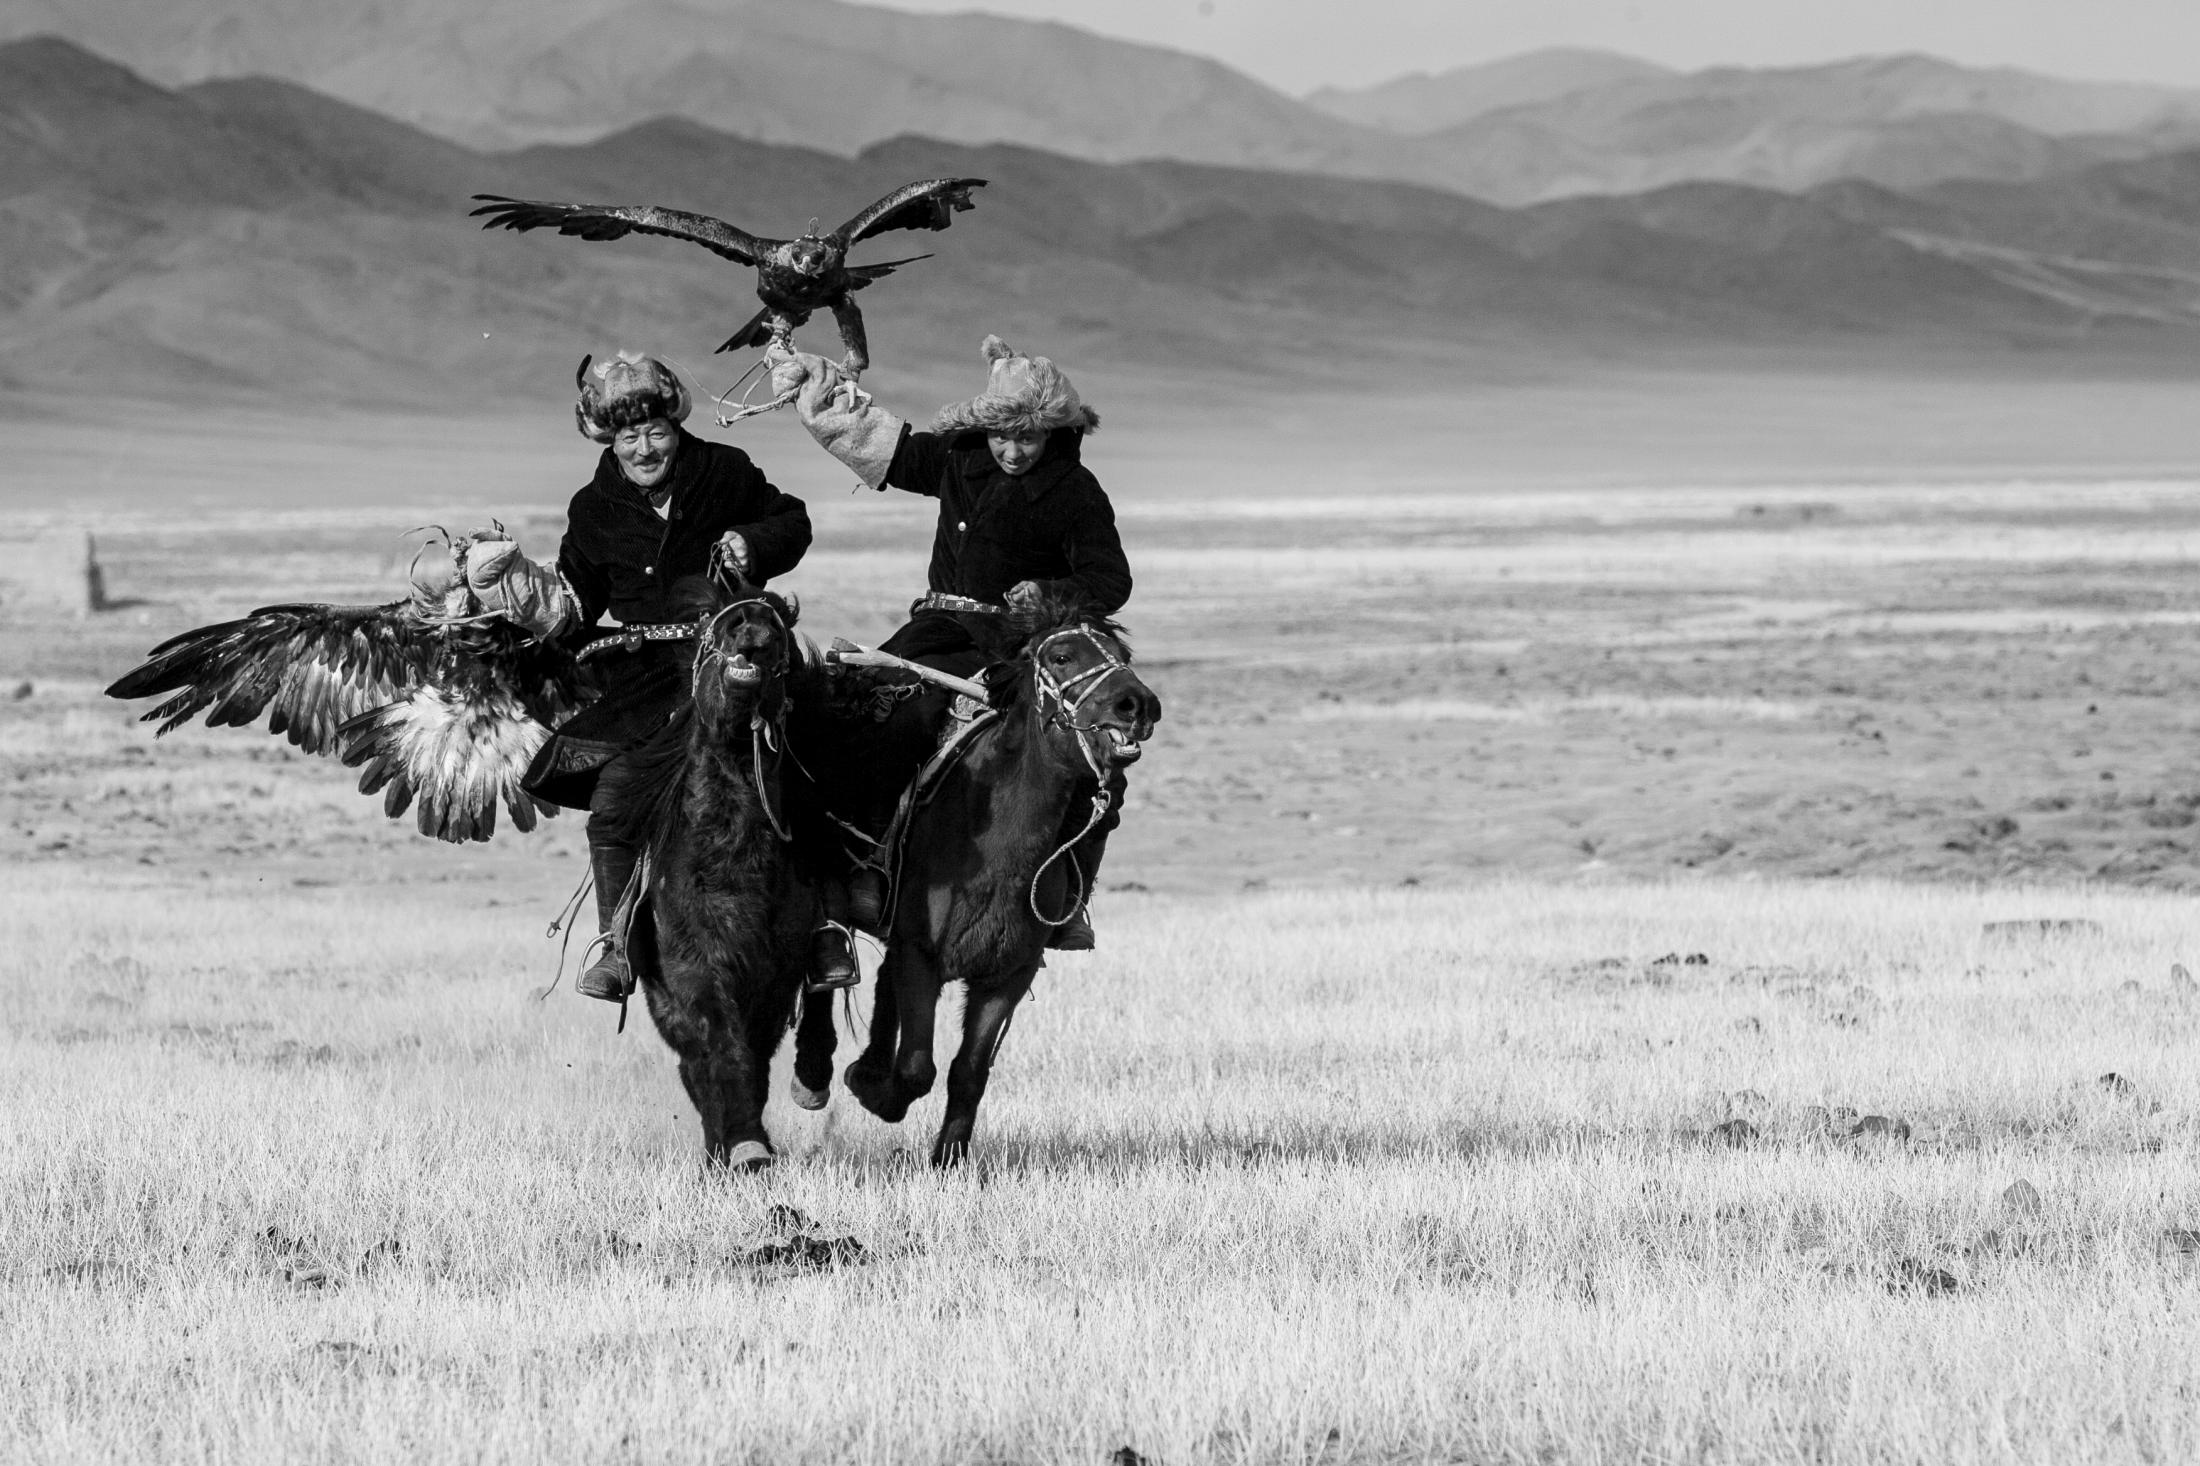  Proud horsmen.&nbsp; The roots of the Kazahk people can be traced back to the 15th century and to Chengis Kahn. The Kazahk minority settled in the Altai mountains in the 19th century after fleeing the Russian Empire for fear of it ending their nomadic lifestyle. The horse is still their primary means of transportation. Here the hunters are on their way home after hunting training.